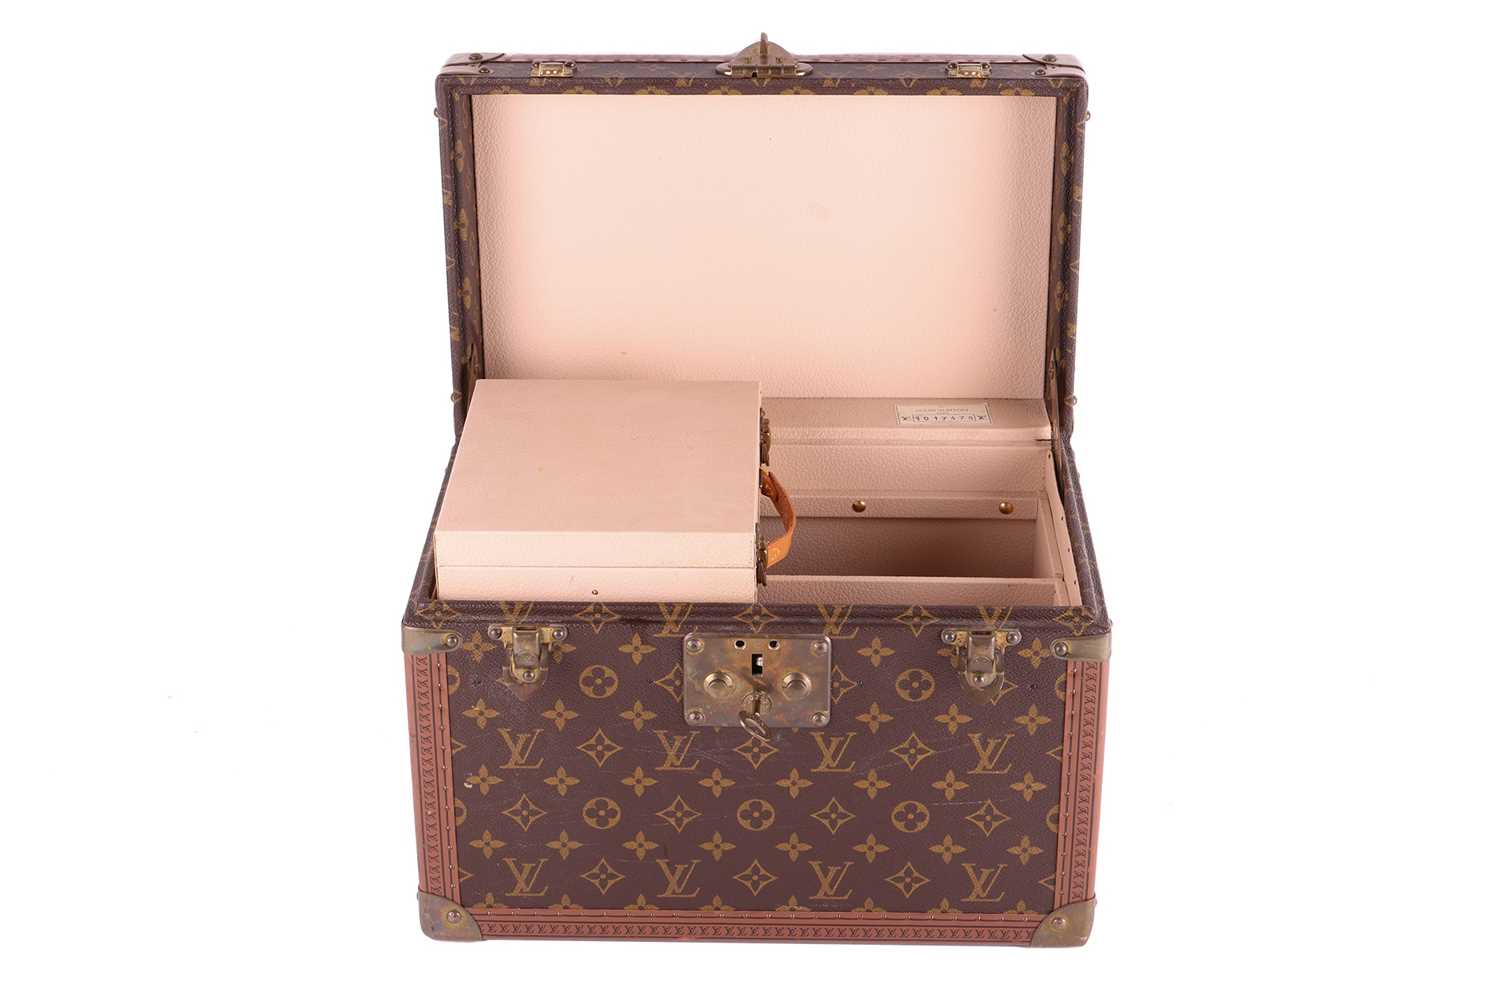 Louis Vuitton - a 'Boîte à Pharmacie' (pharmacy box) vanity case, in brown monogram canvas, brass lo - Image 12 of 15